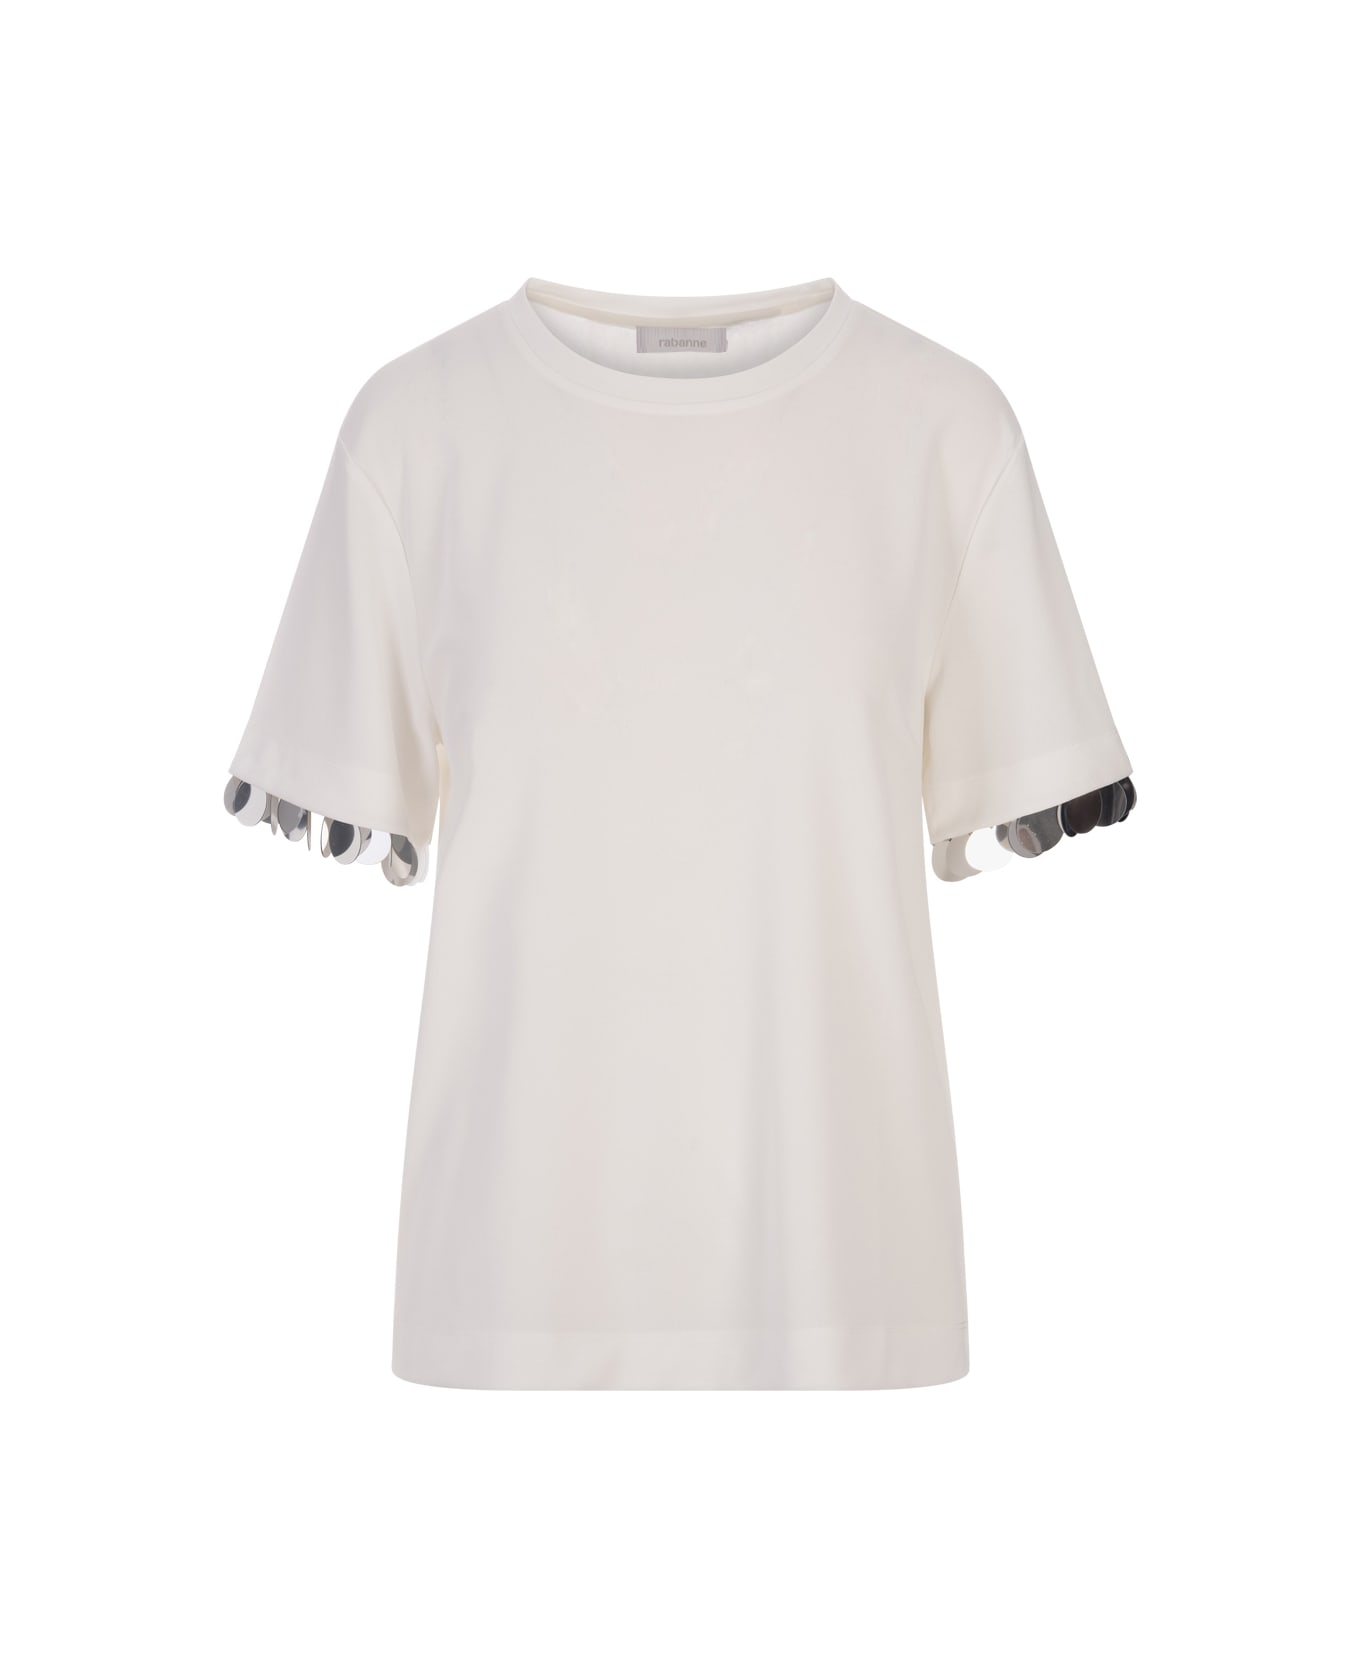 Paco Rabanne White T-shirt With Sequins On Bottom Sleeve - White